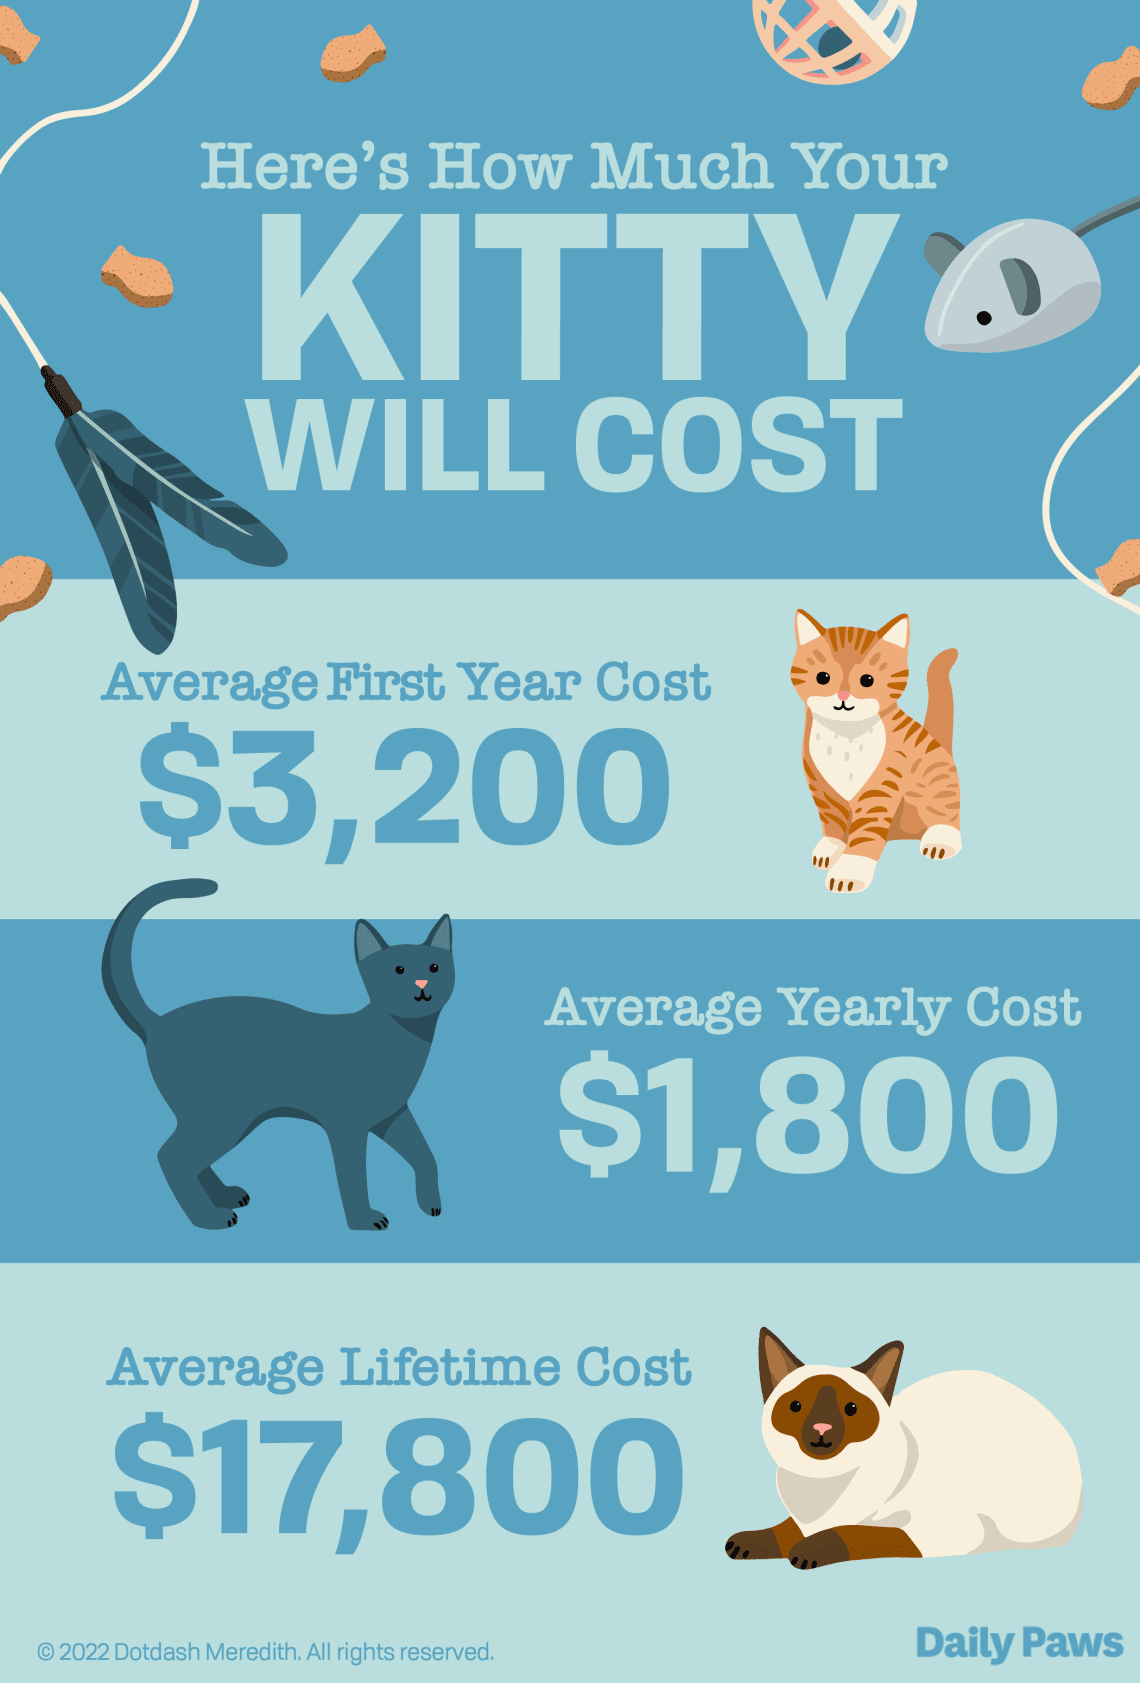 How much do cats cost?